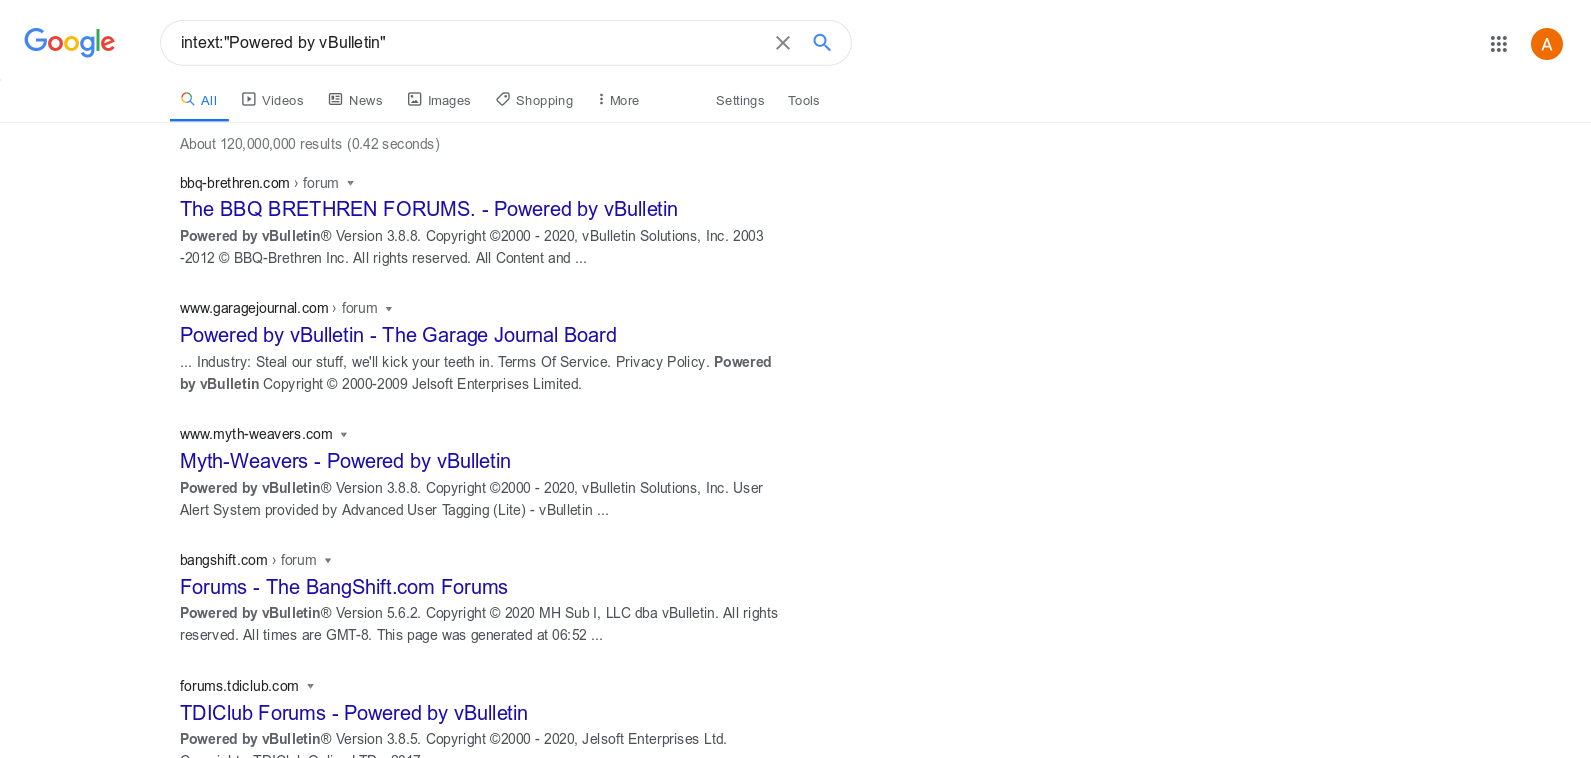 Google dork showing all the websites powered by vBulletin software